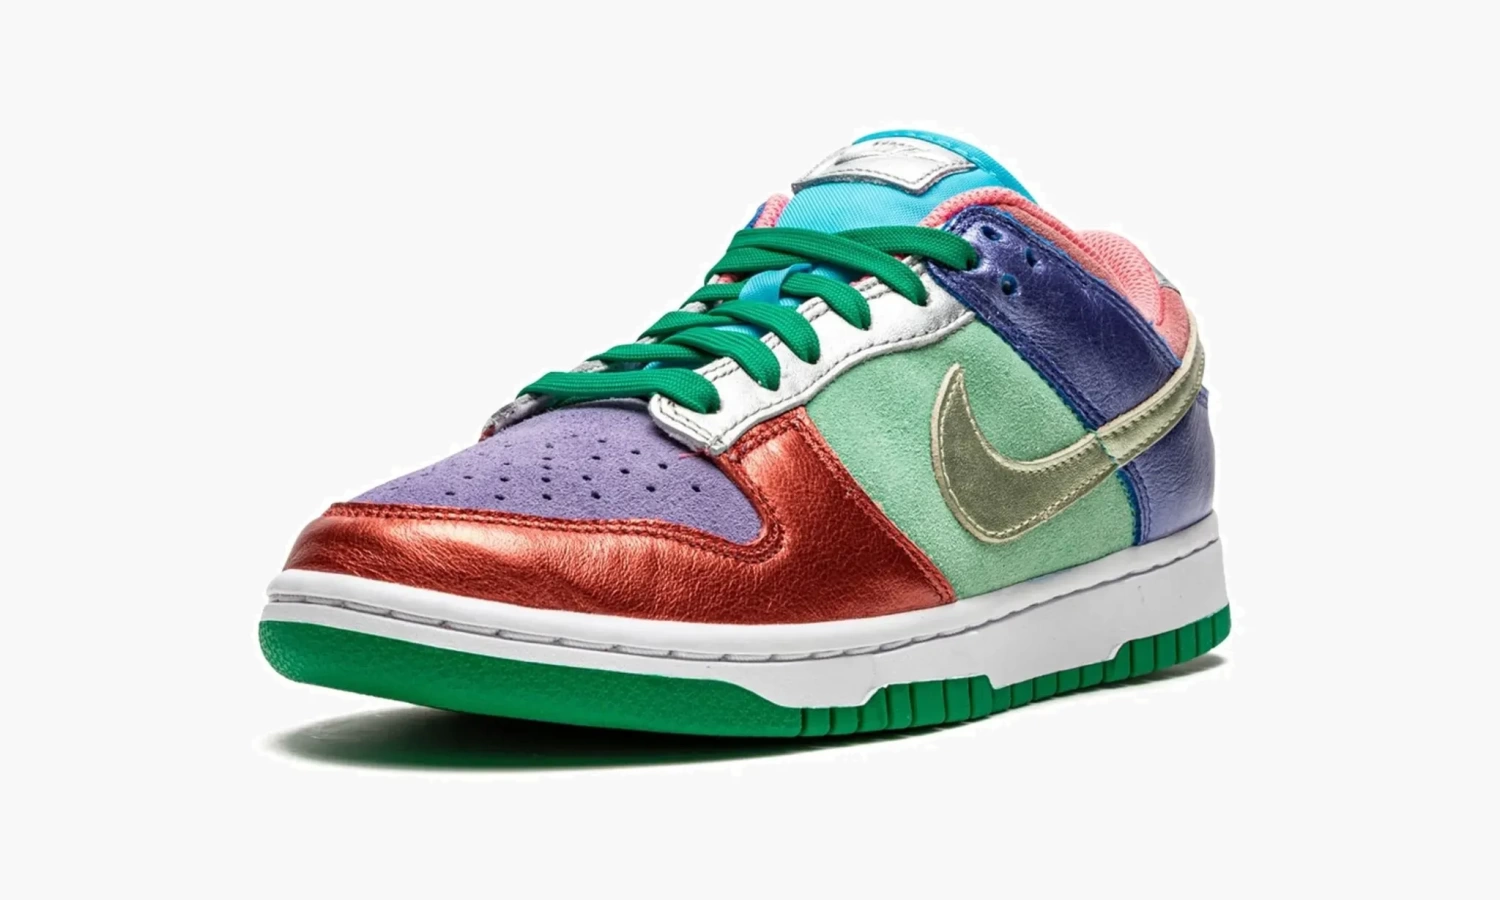 фото Dunk Low WMNS "Sunset Pulse" (Nike Dunk)-DN0855 600